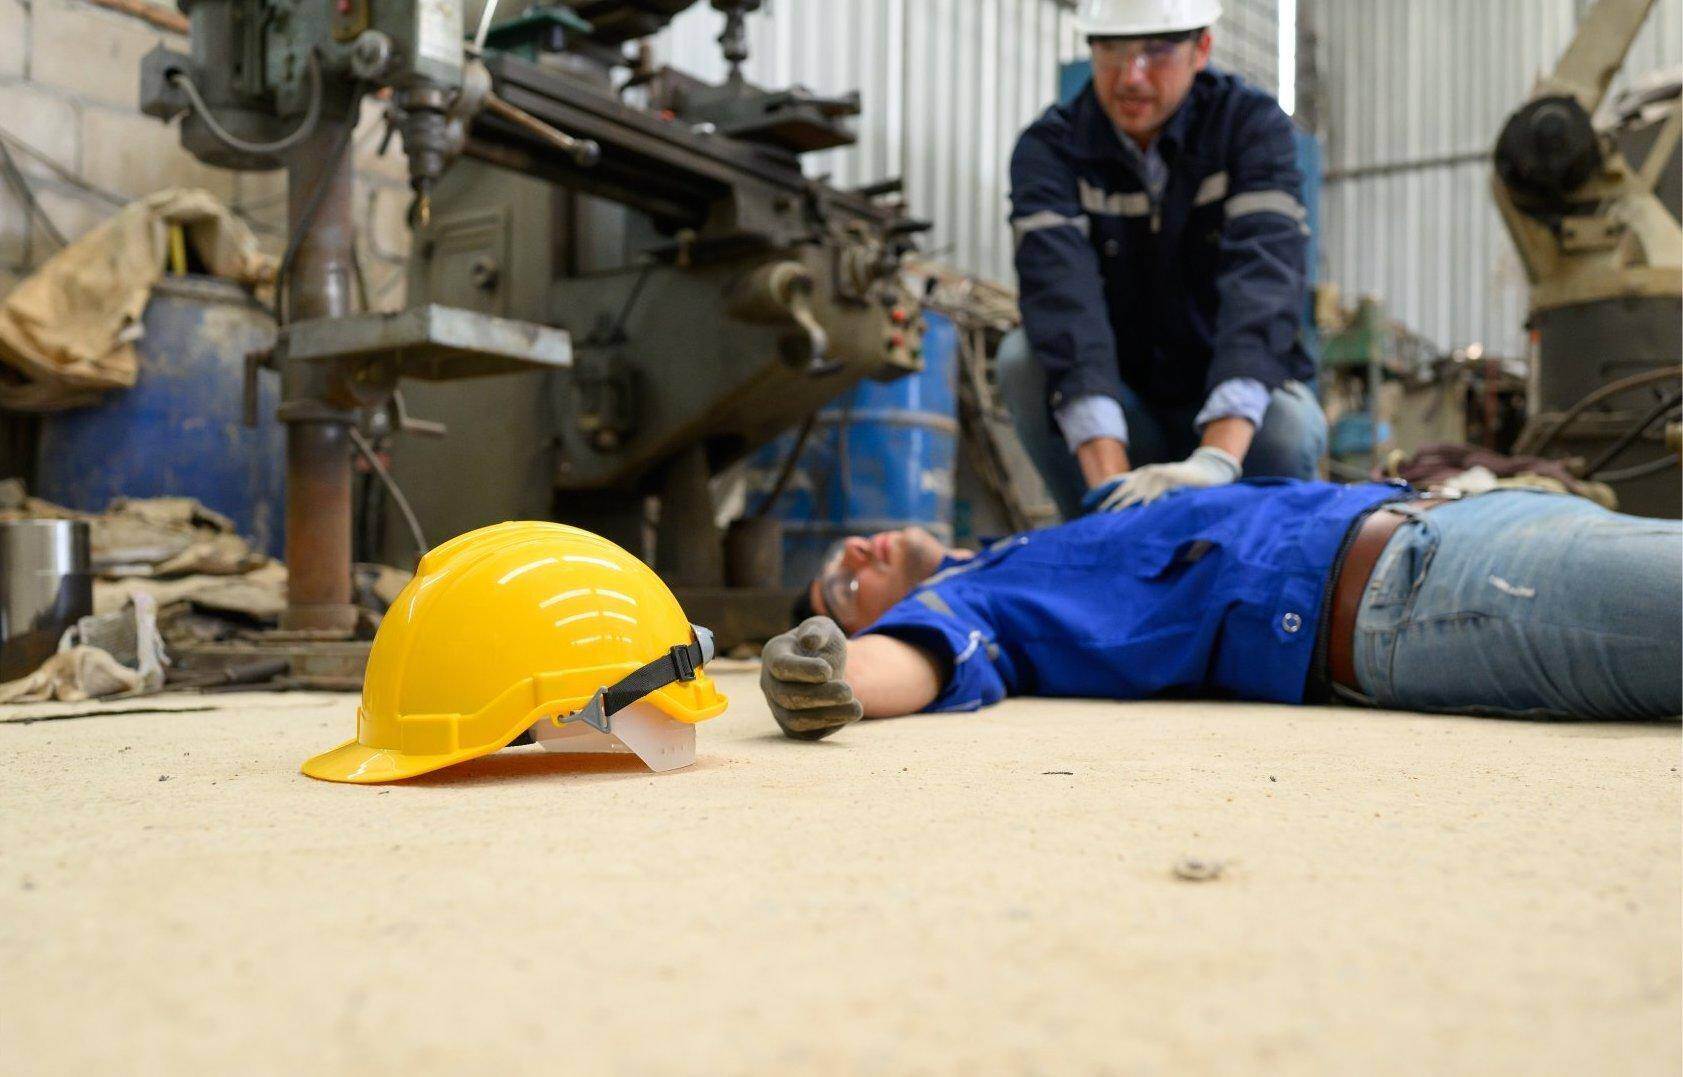 An unconscious man who has been injured on the job who will file for workers compensation in Moultrie, Georgia